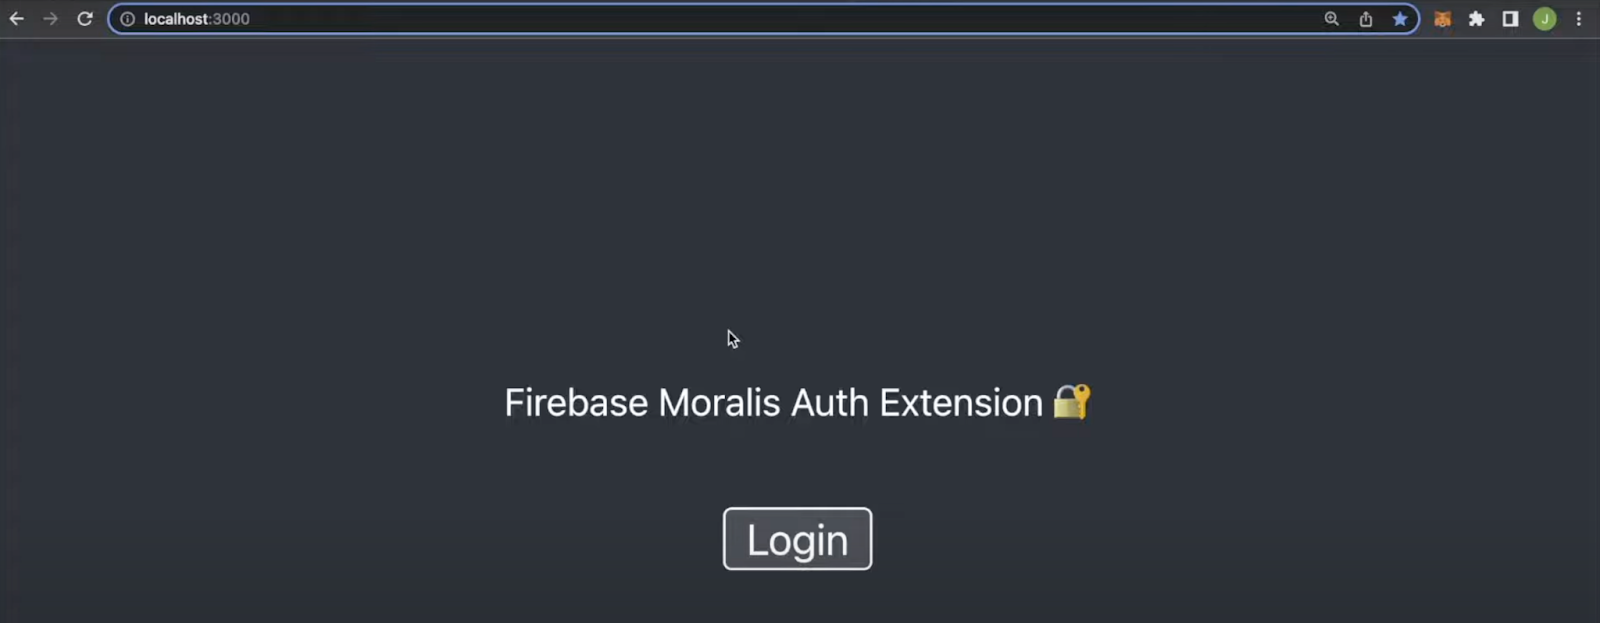 Showing the finalized application page that has a "Firebase Moralis Auth Extension" title and a "Login" button.